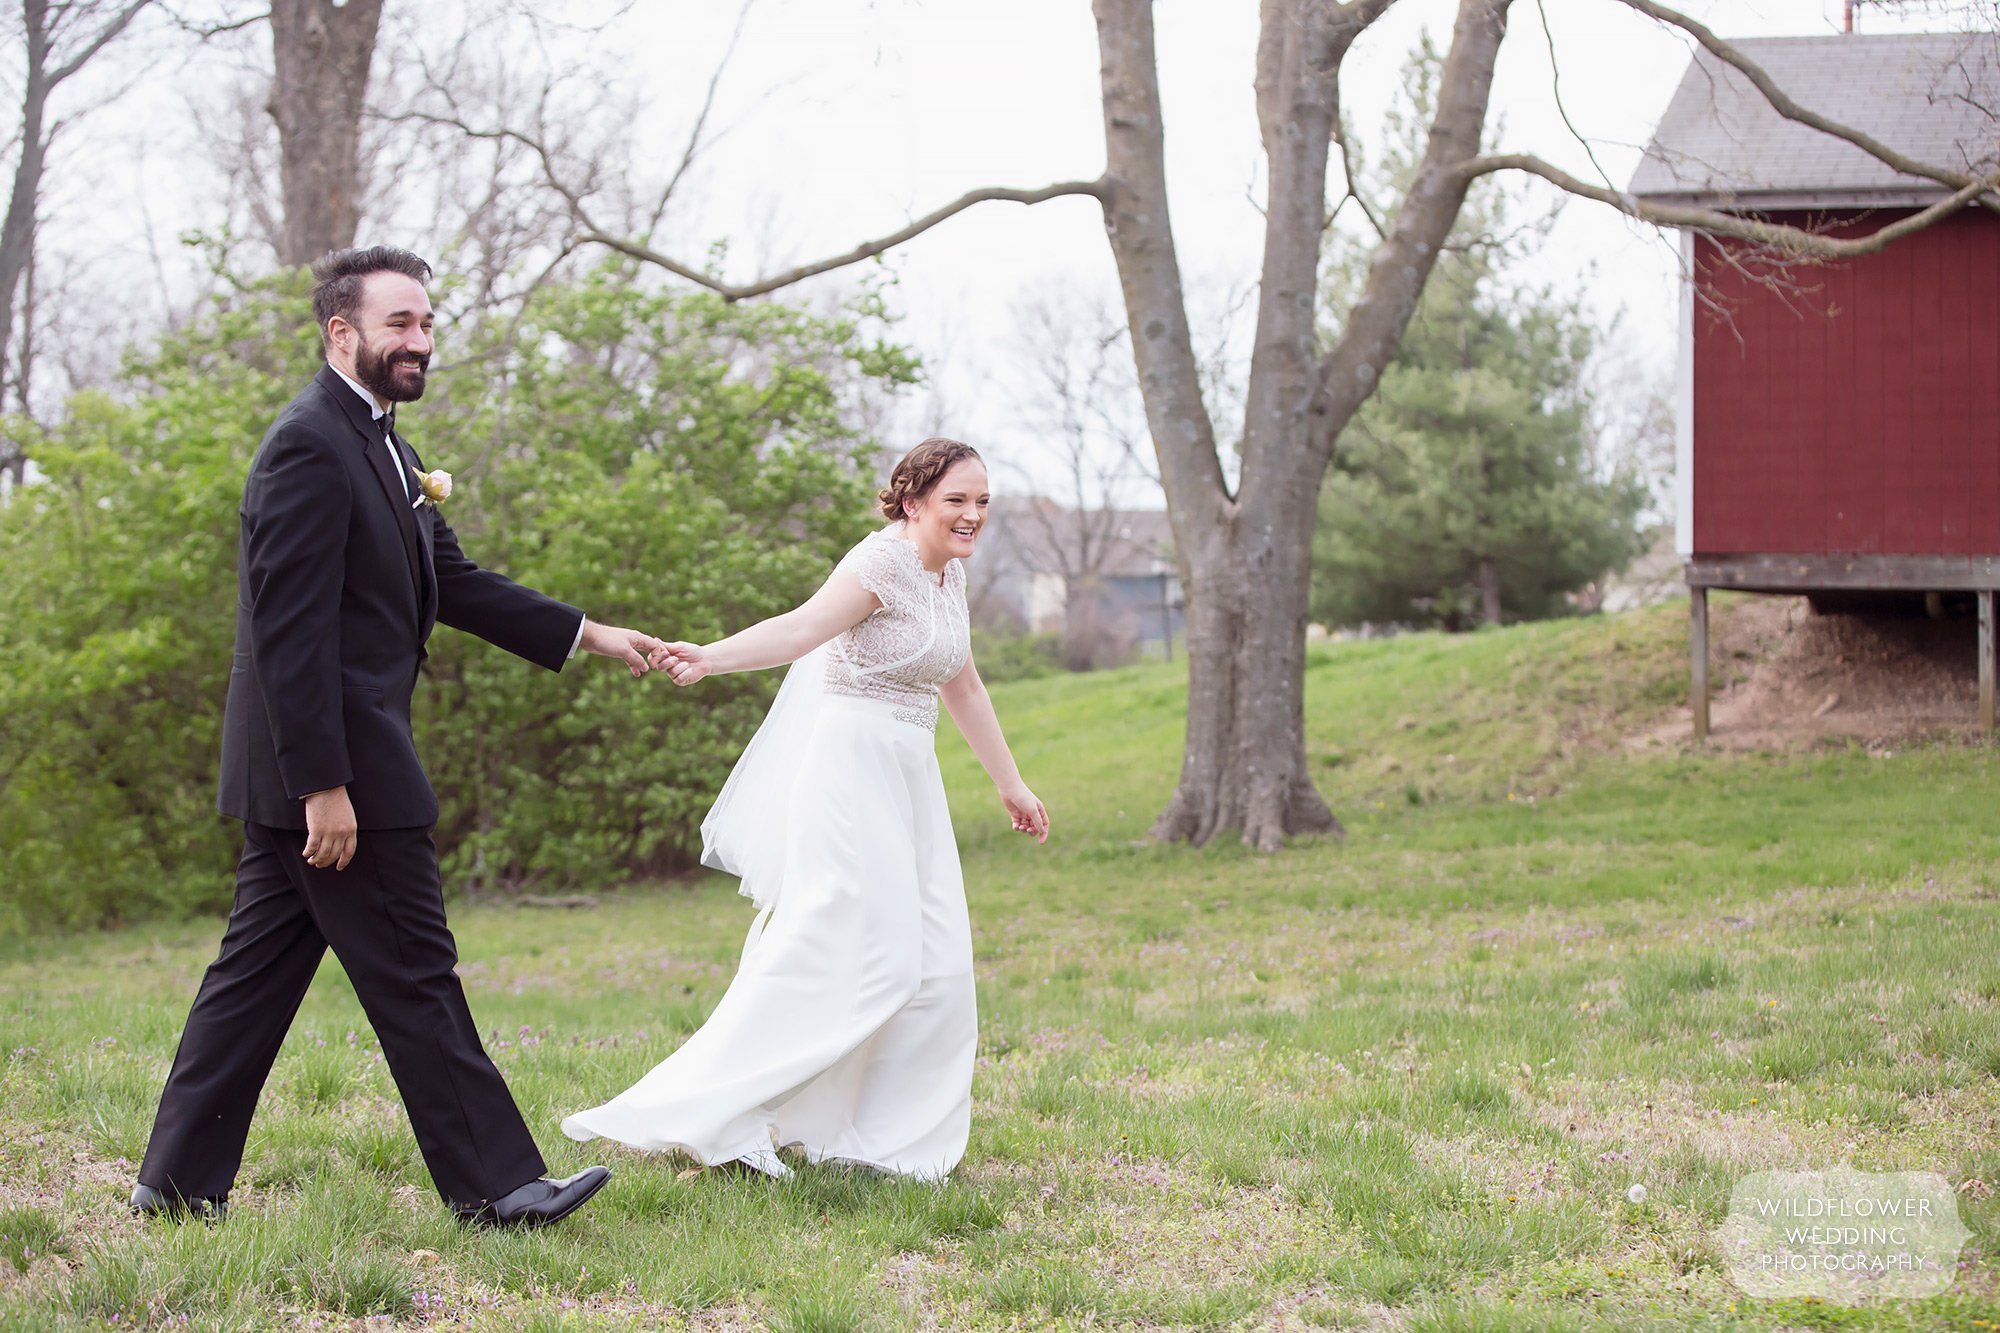 Candid photo of the bride pulling the groom along before their elopement ceremony near the Maplewood Barn.